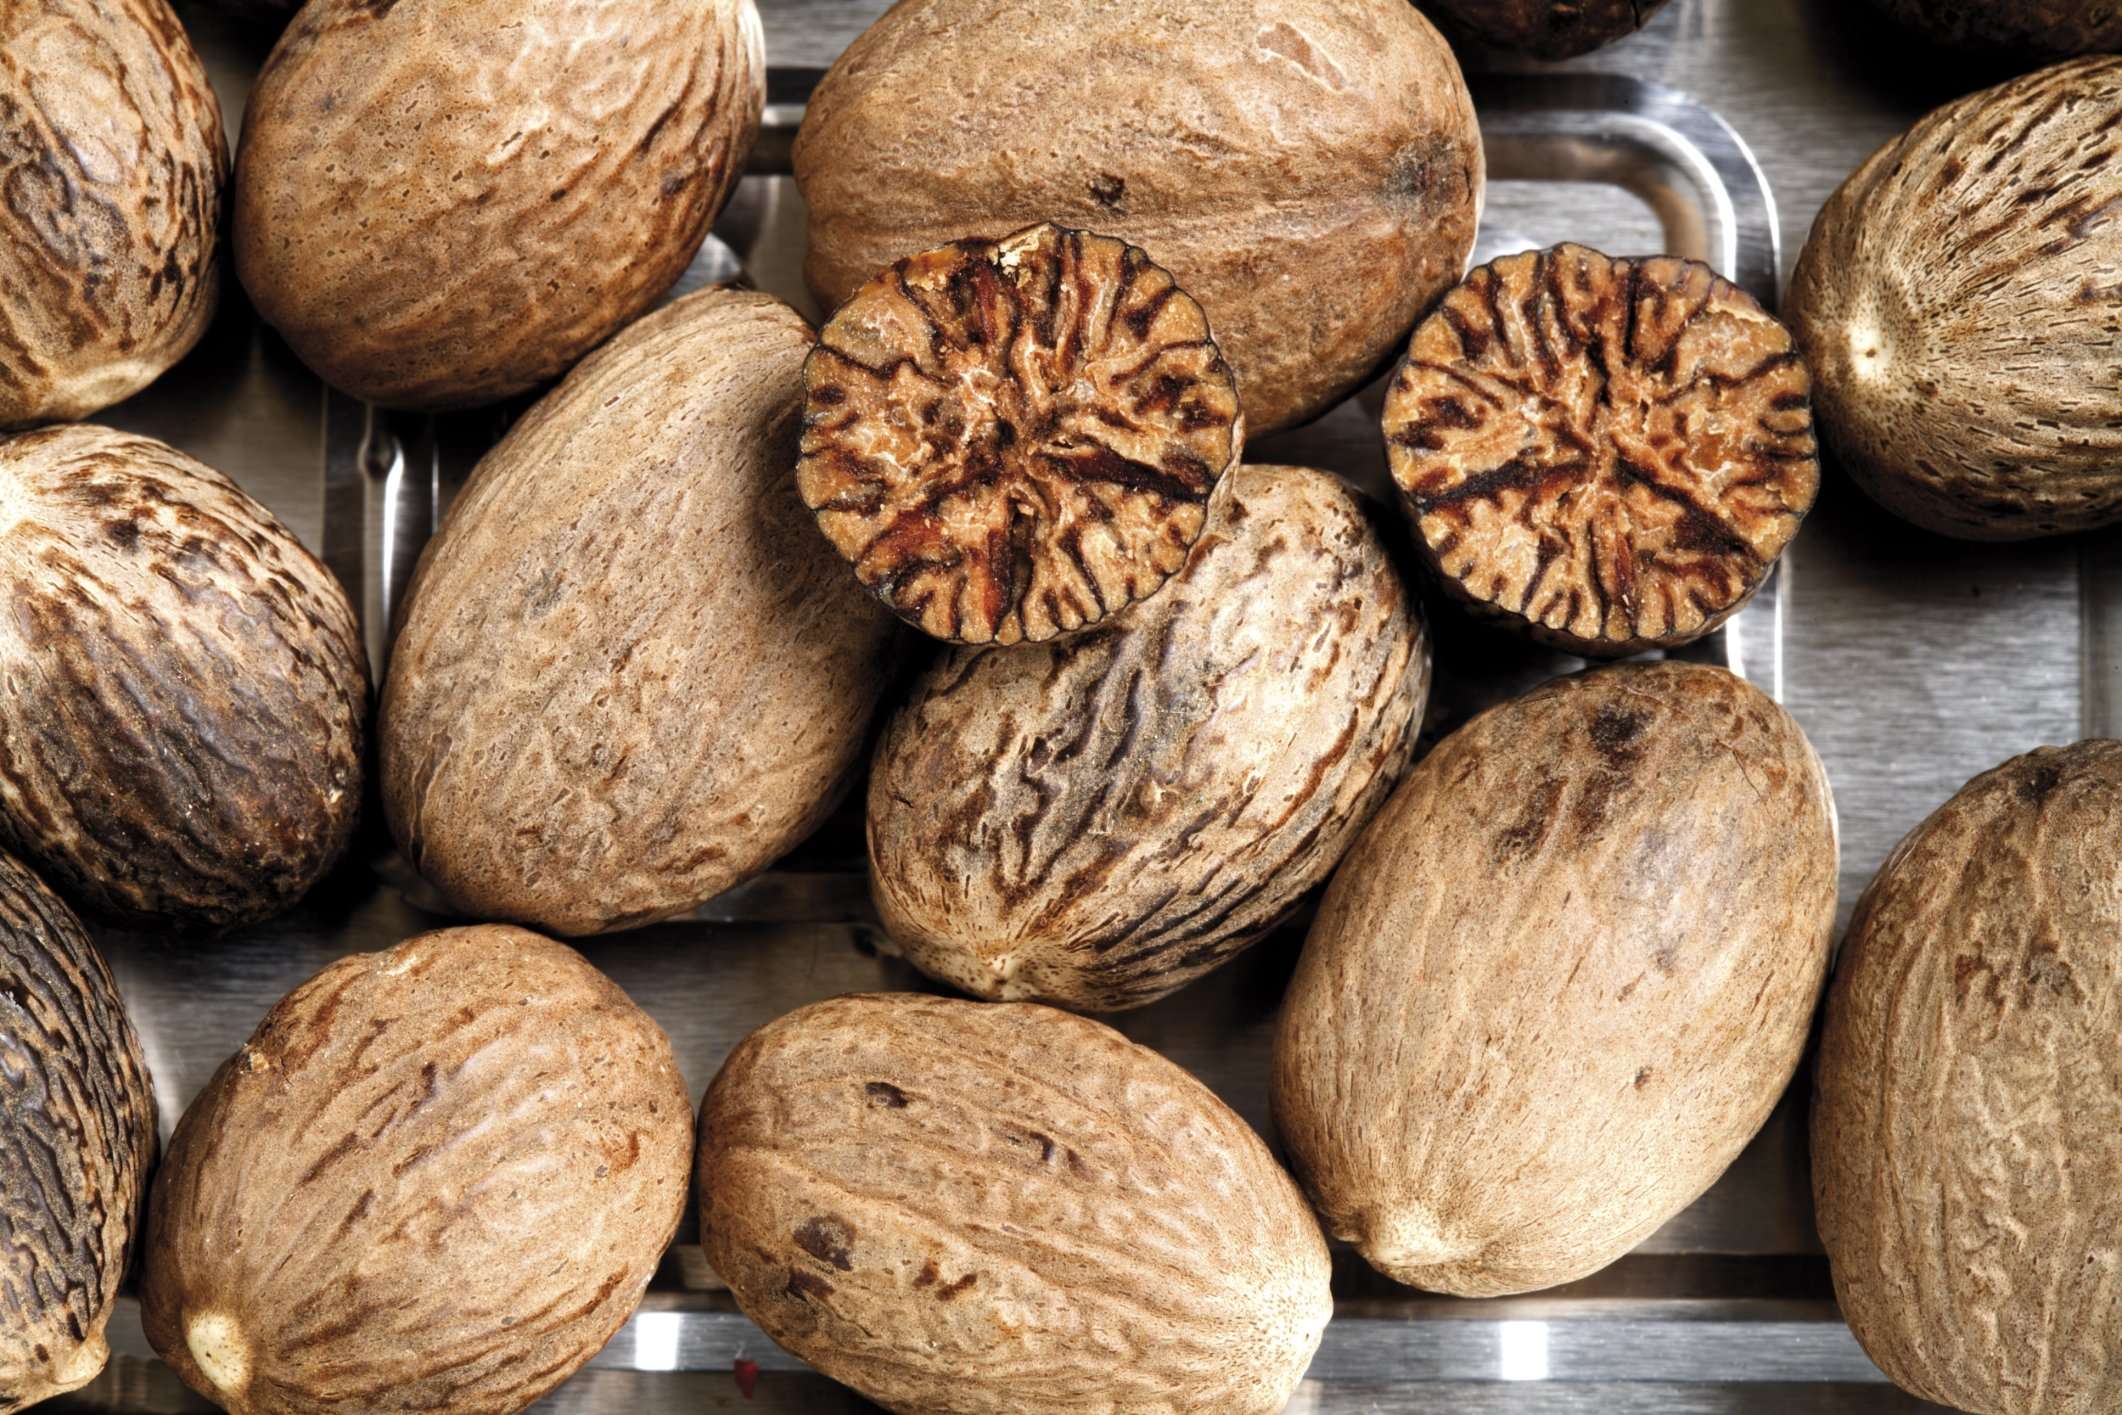 What Are Allergy Symptoms From Nutmeg?